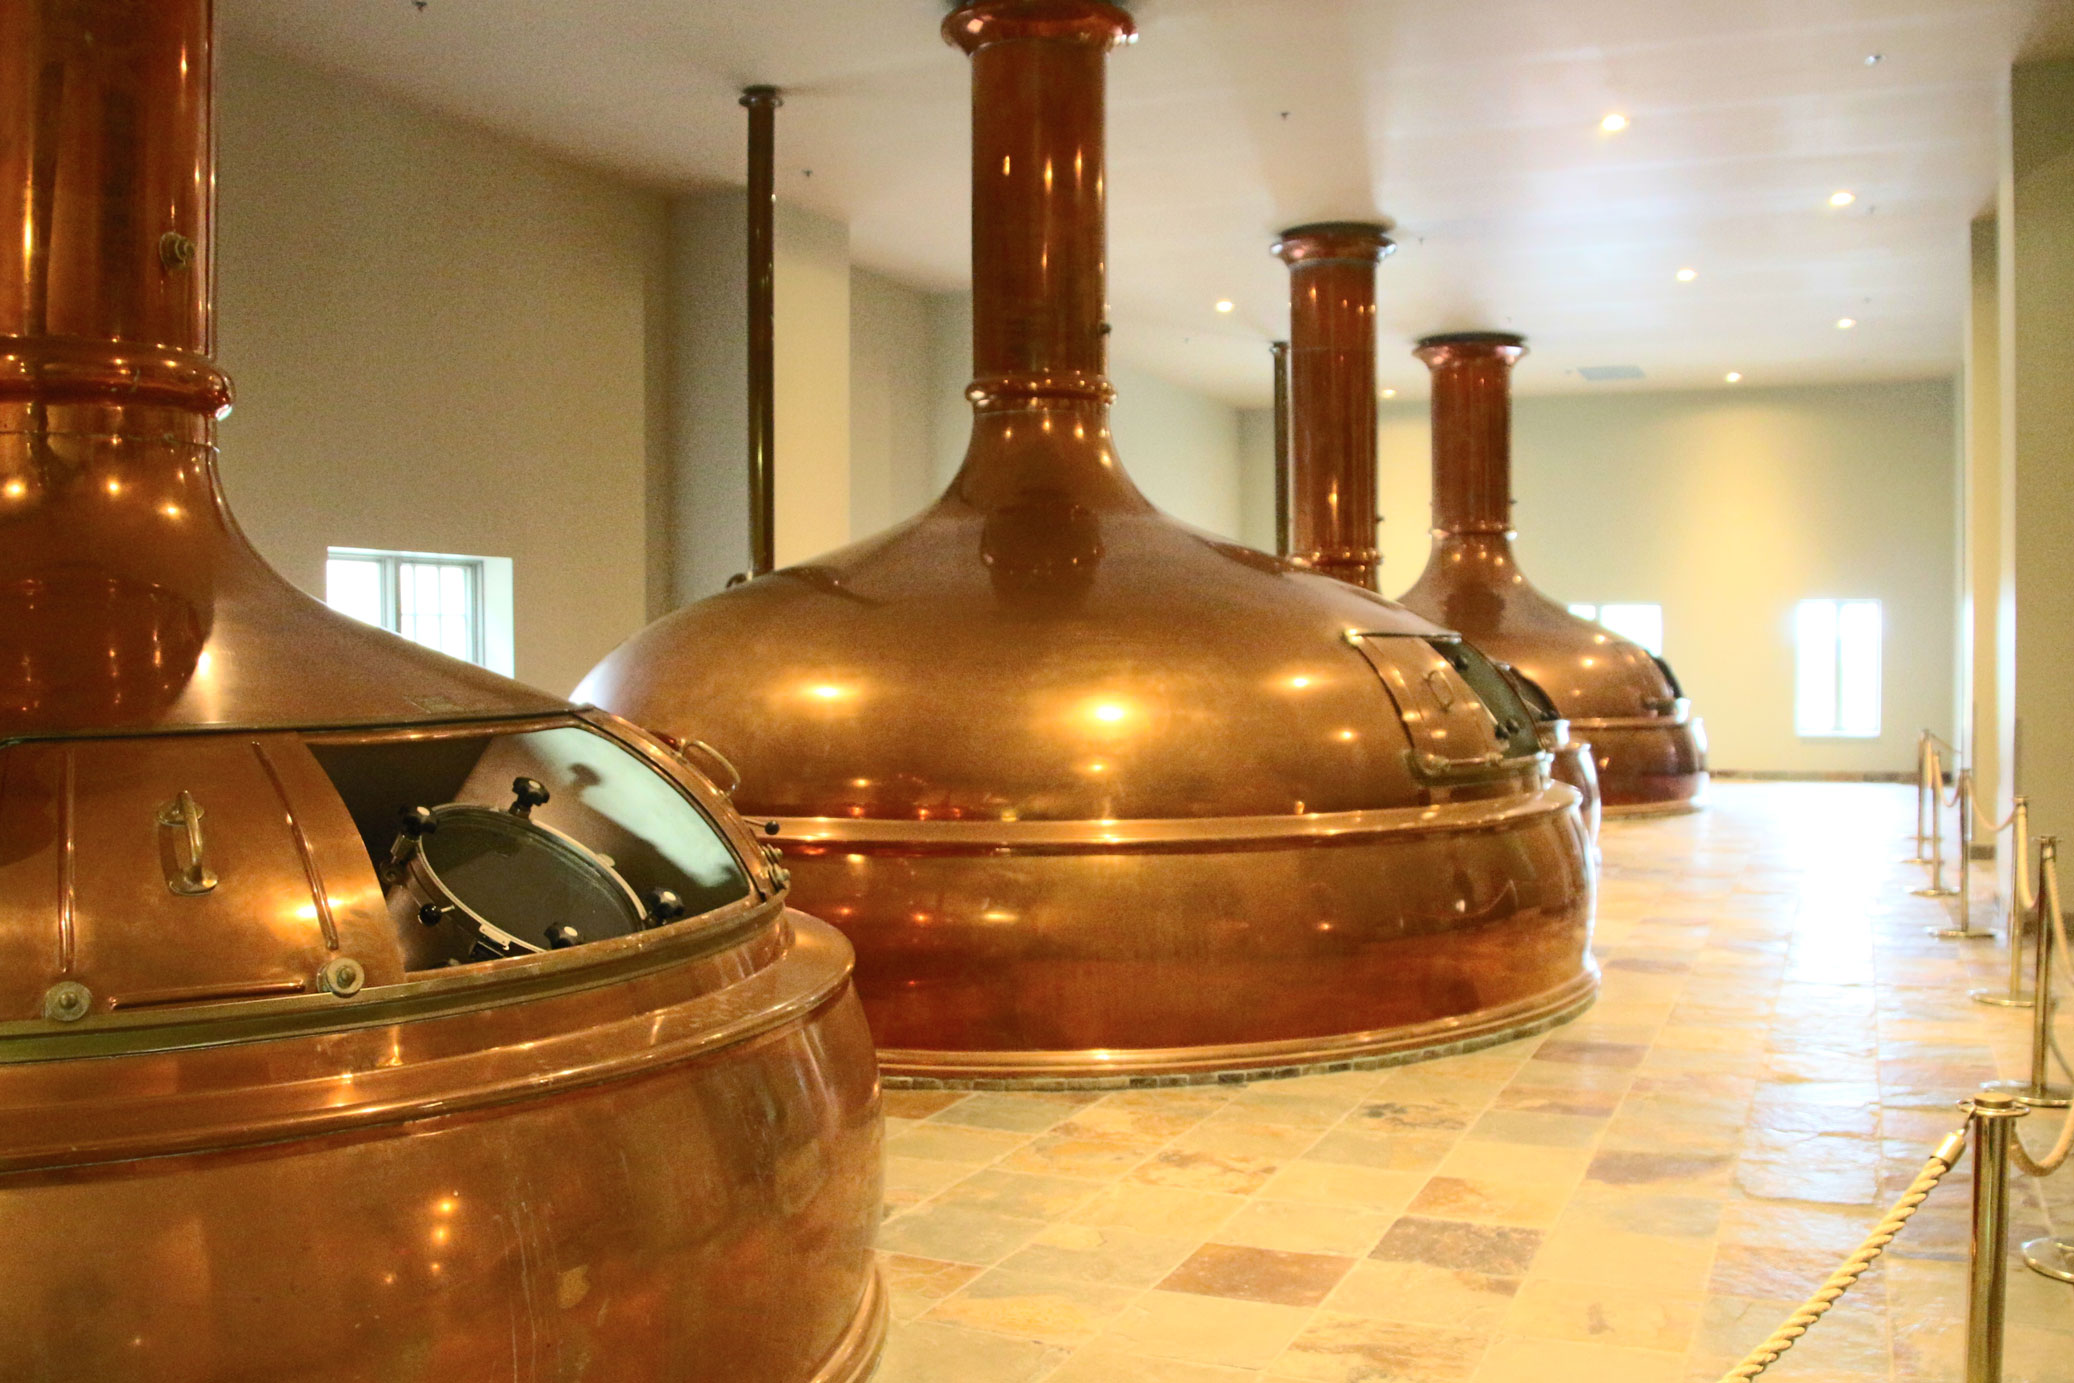 New Glarus Brewing Company by Dick Burr